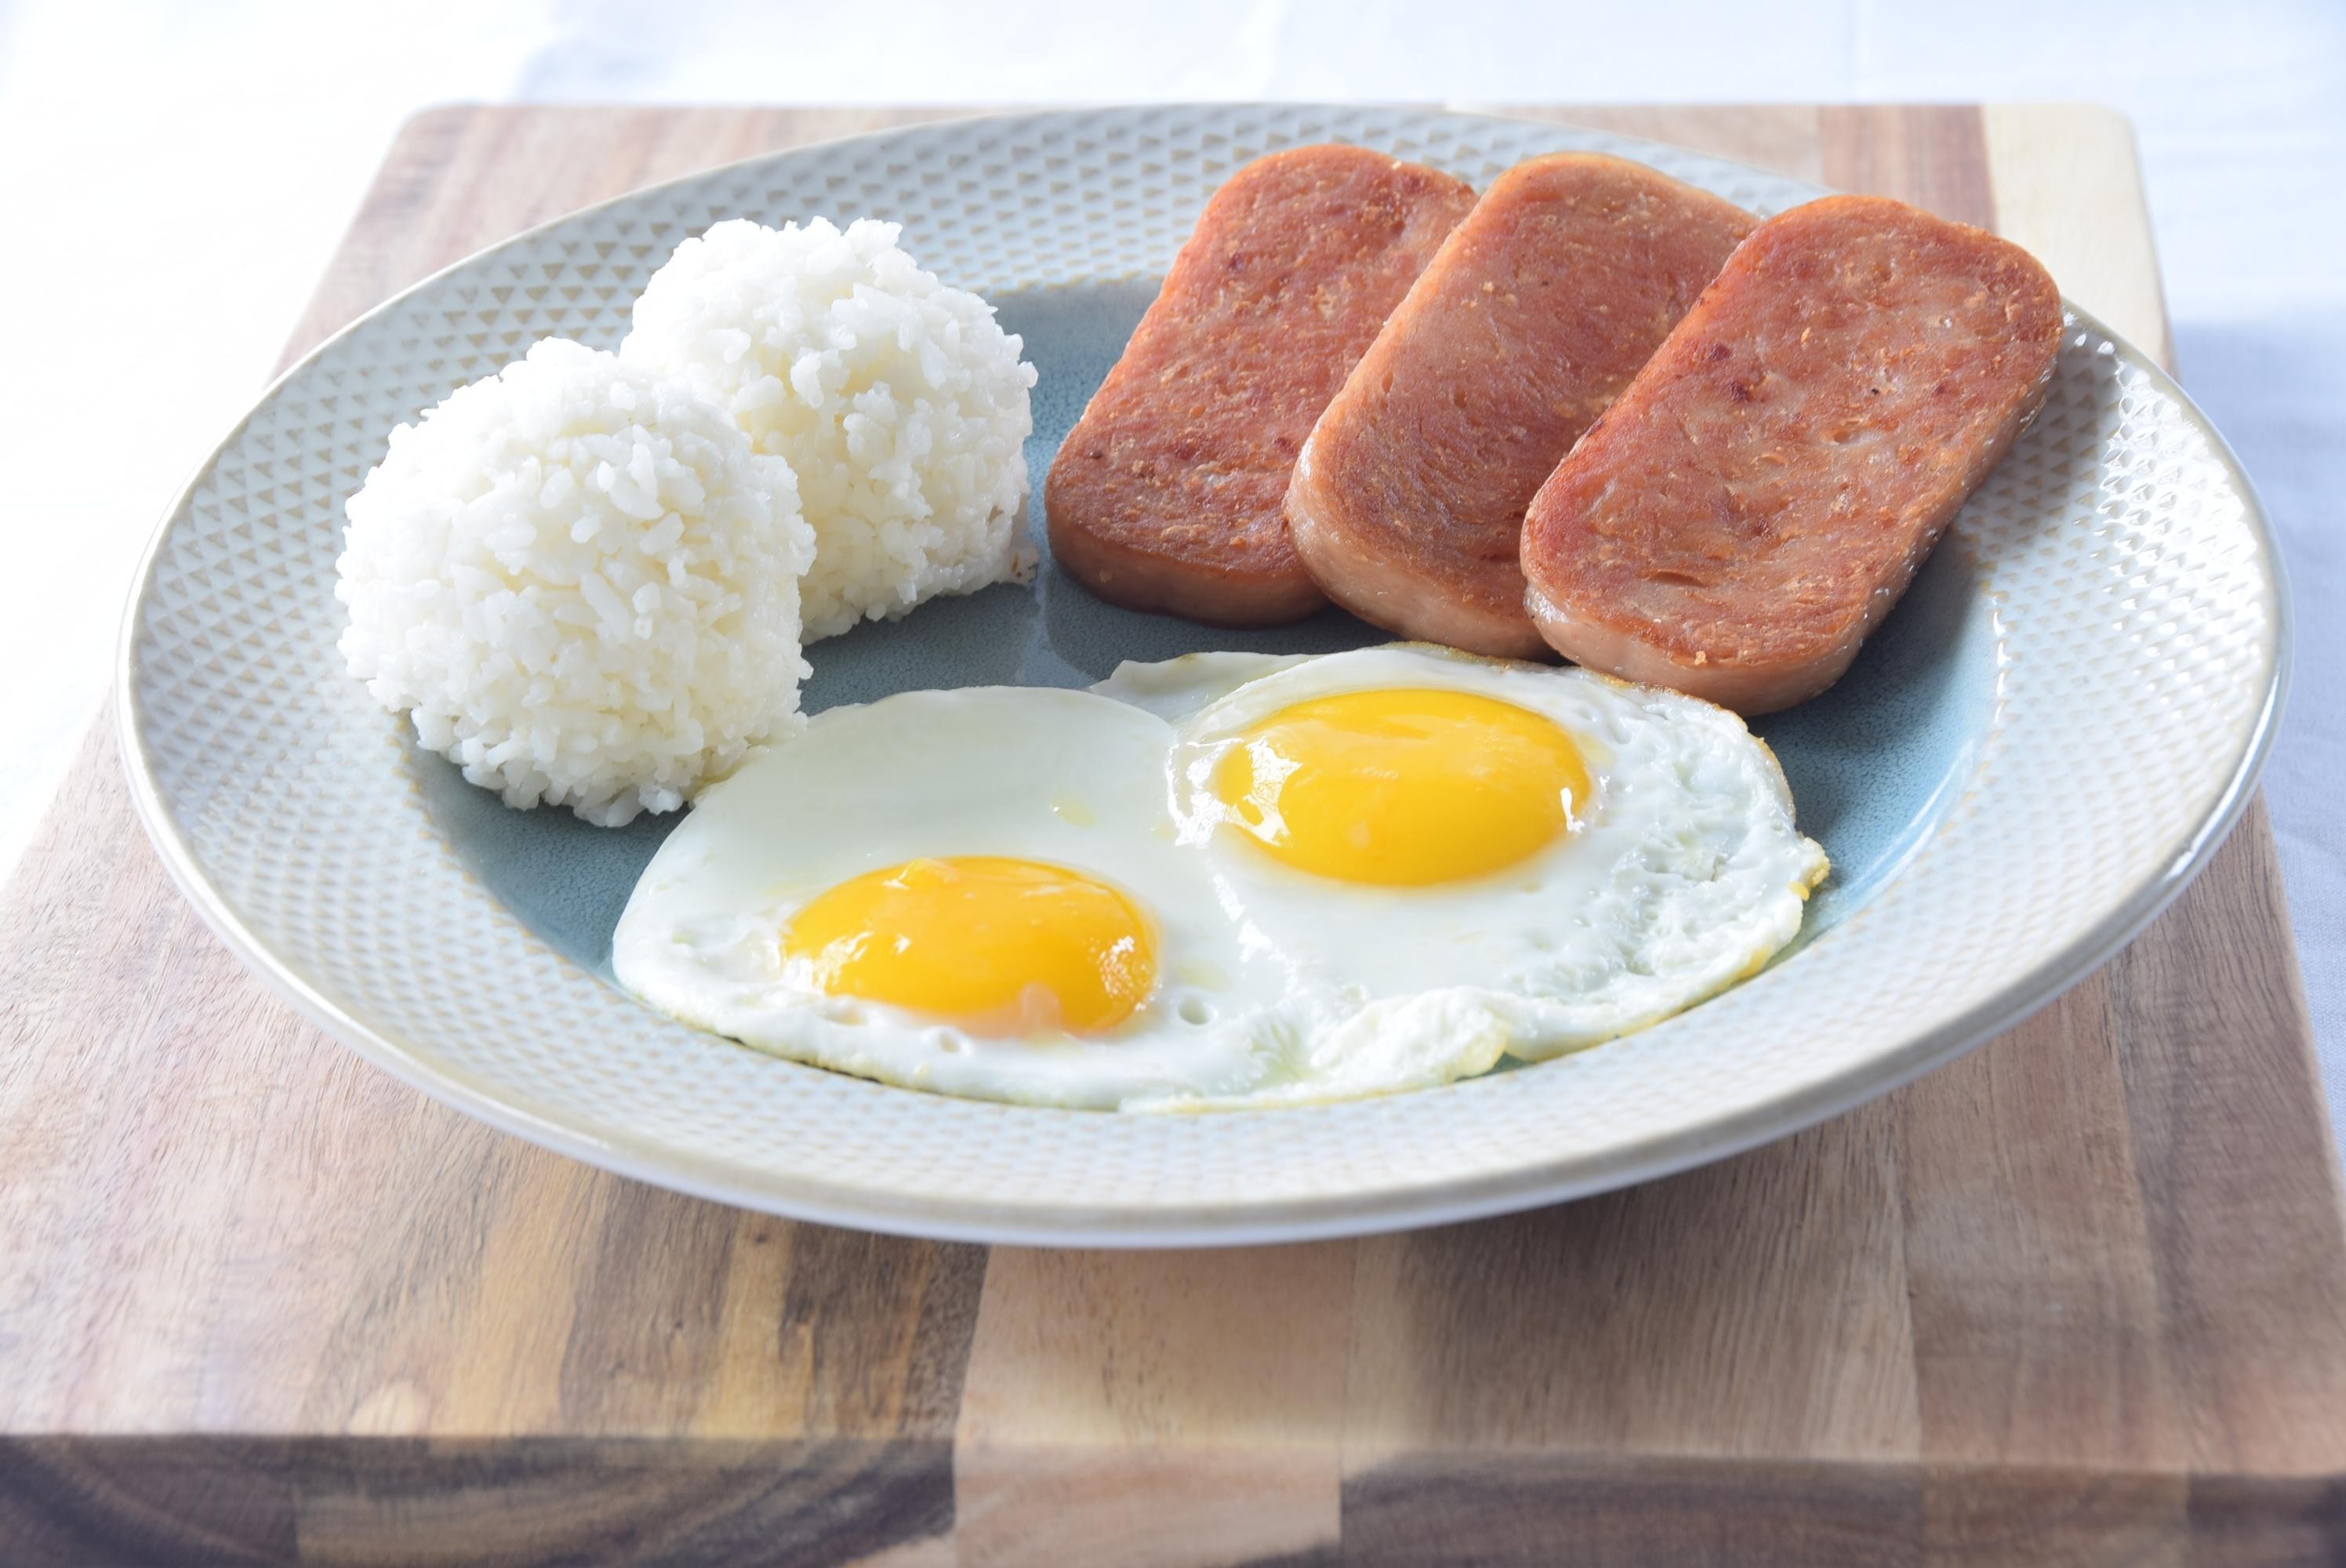 SPAM and Eggs Plate